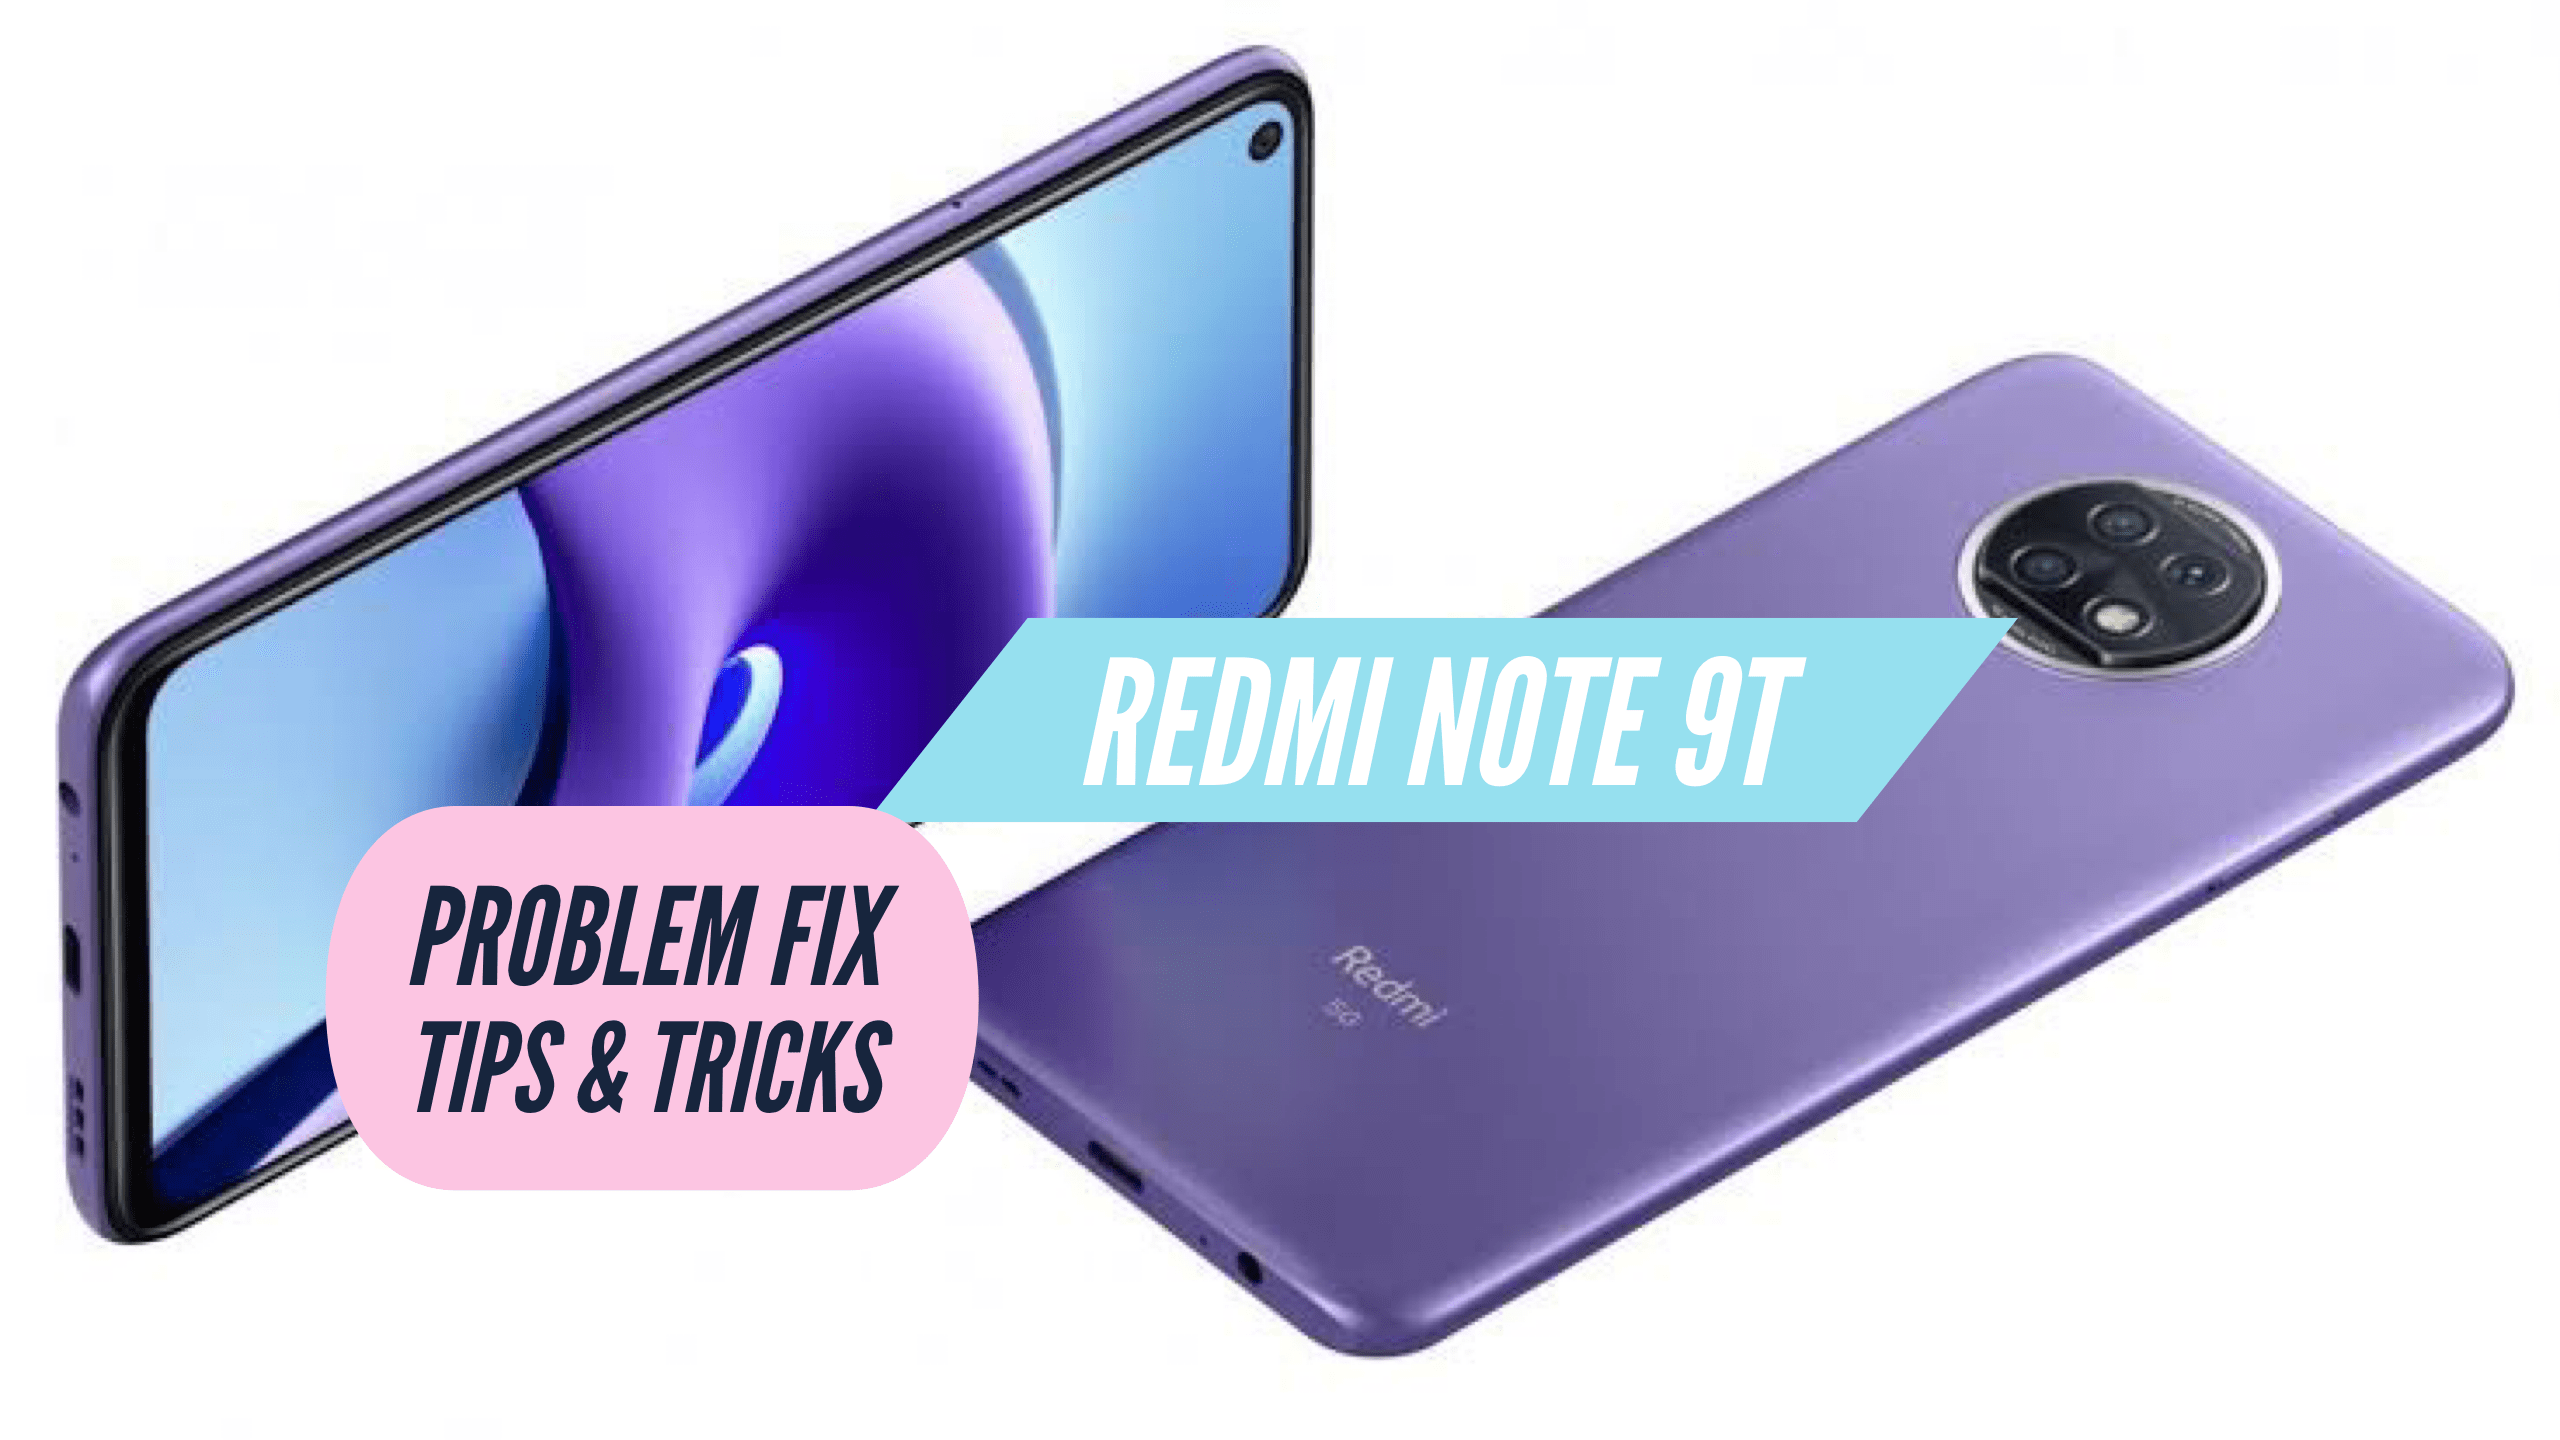 Redmi Note 9T Problem Fix Issues Solution TIPS & TRICKS